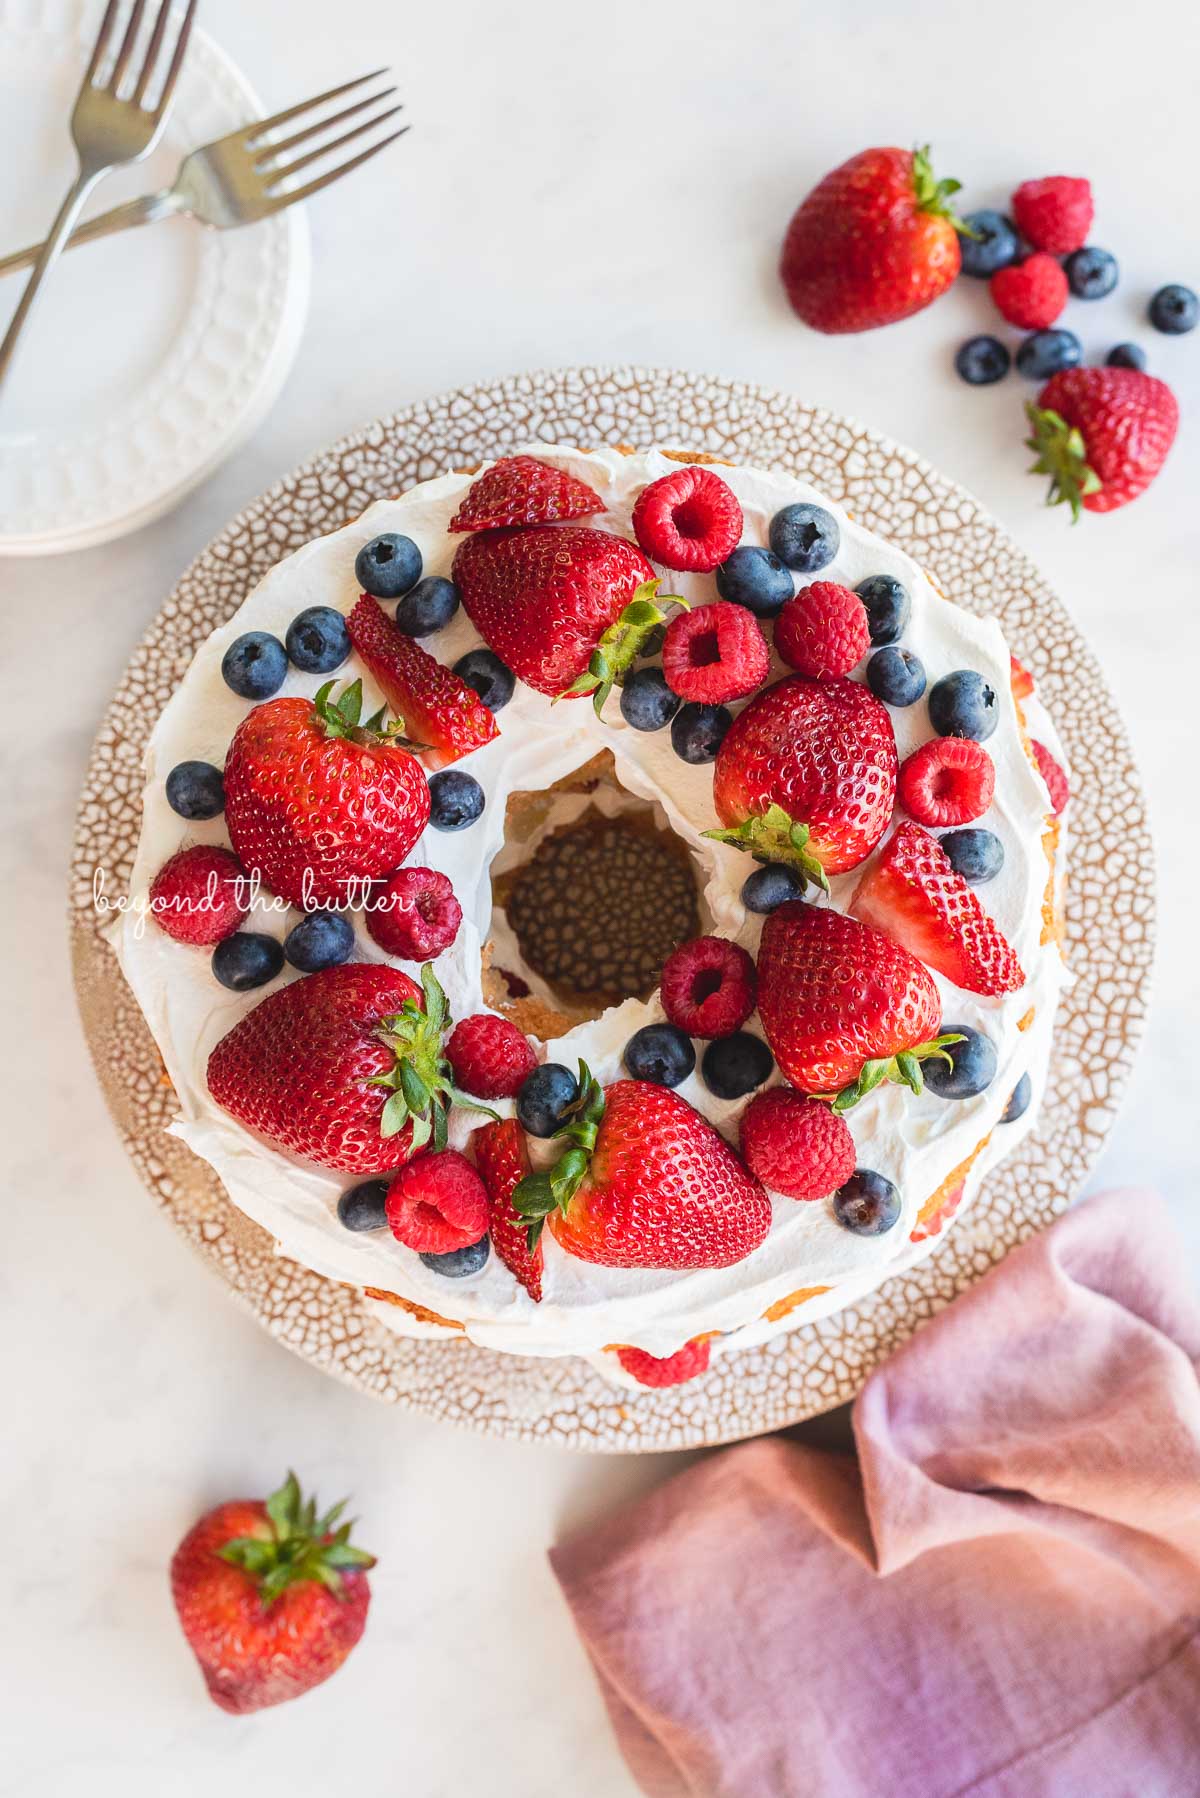 Homemade angel food cake on ceramic cake stand surrounded by dessert plates, forks, berries, and mauve colored cloth napkin on white marbled background | © Beyond the Butter®